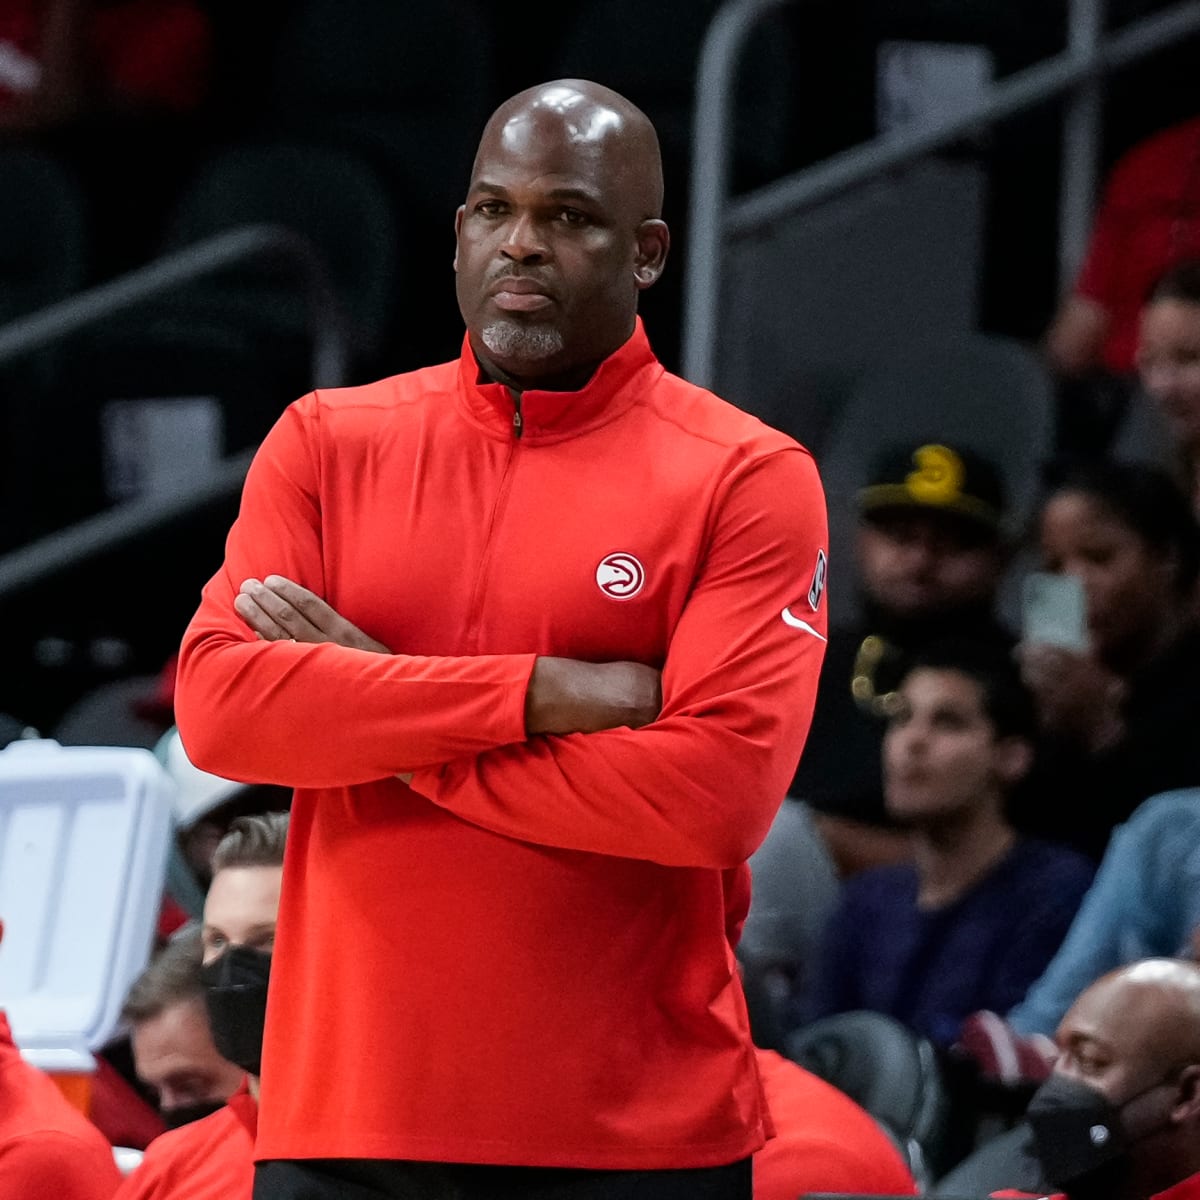 Hawks reach agreement to make Nate McMillan full-time coach - The